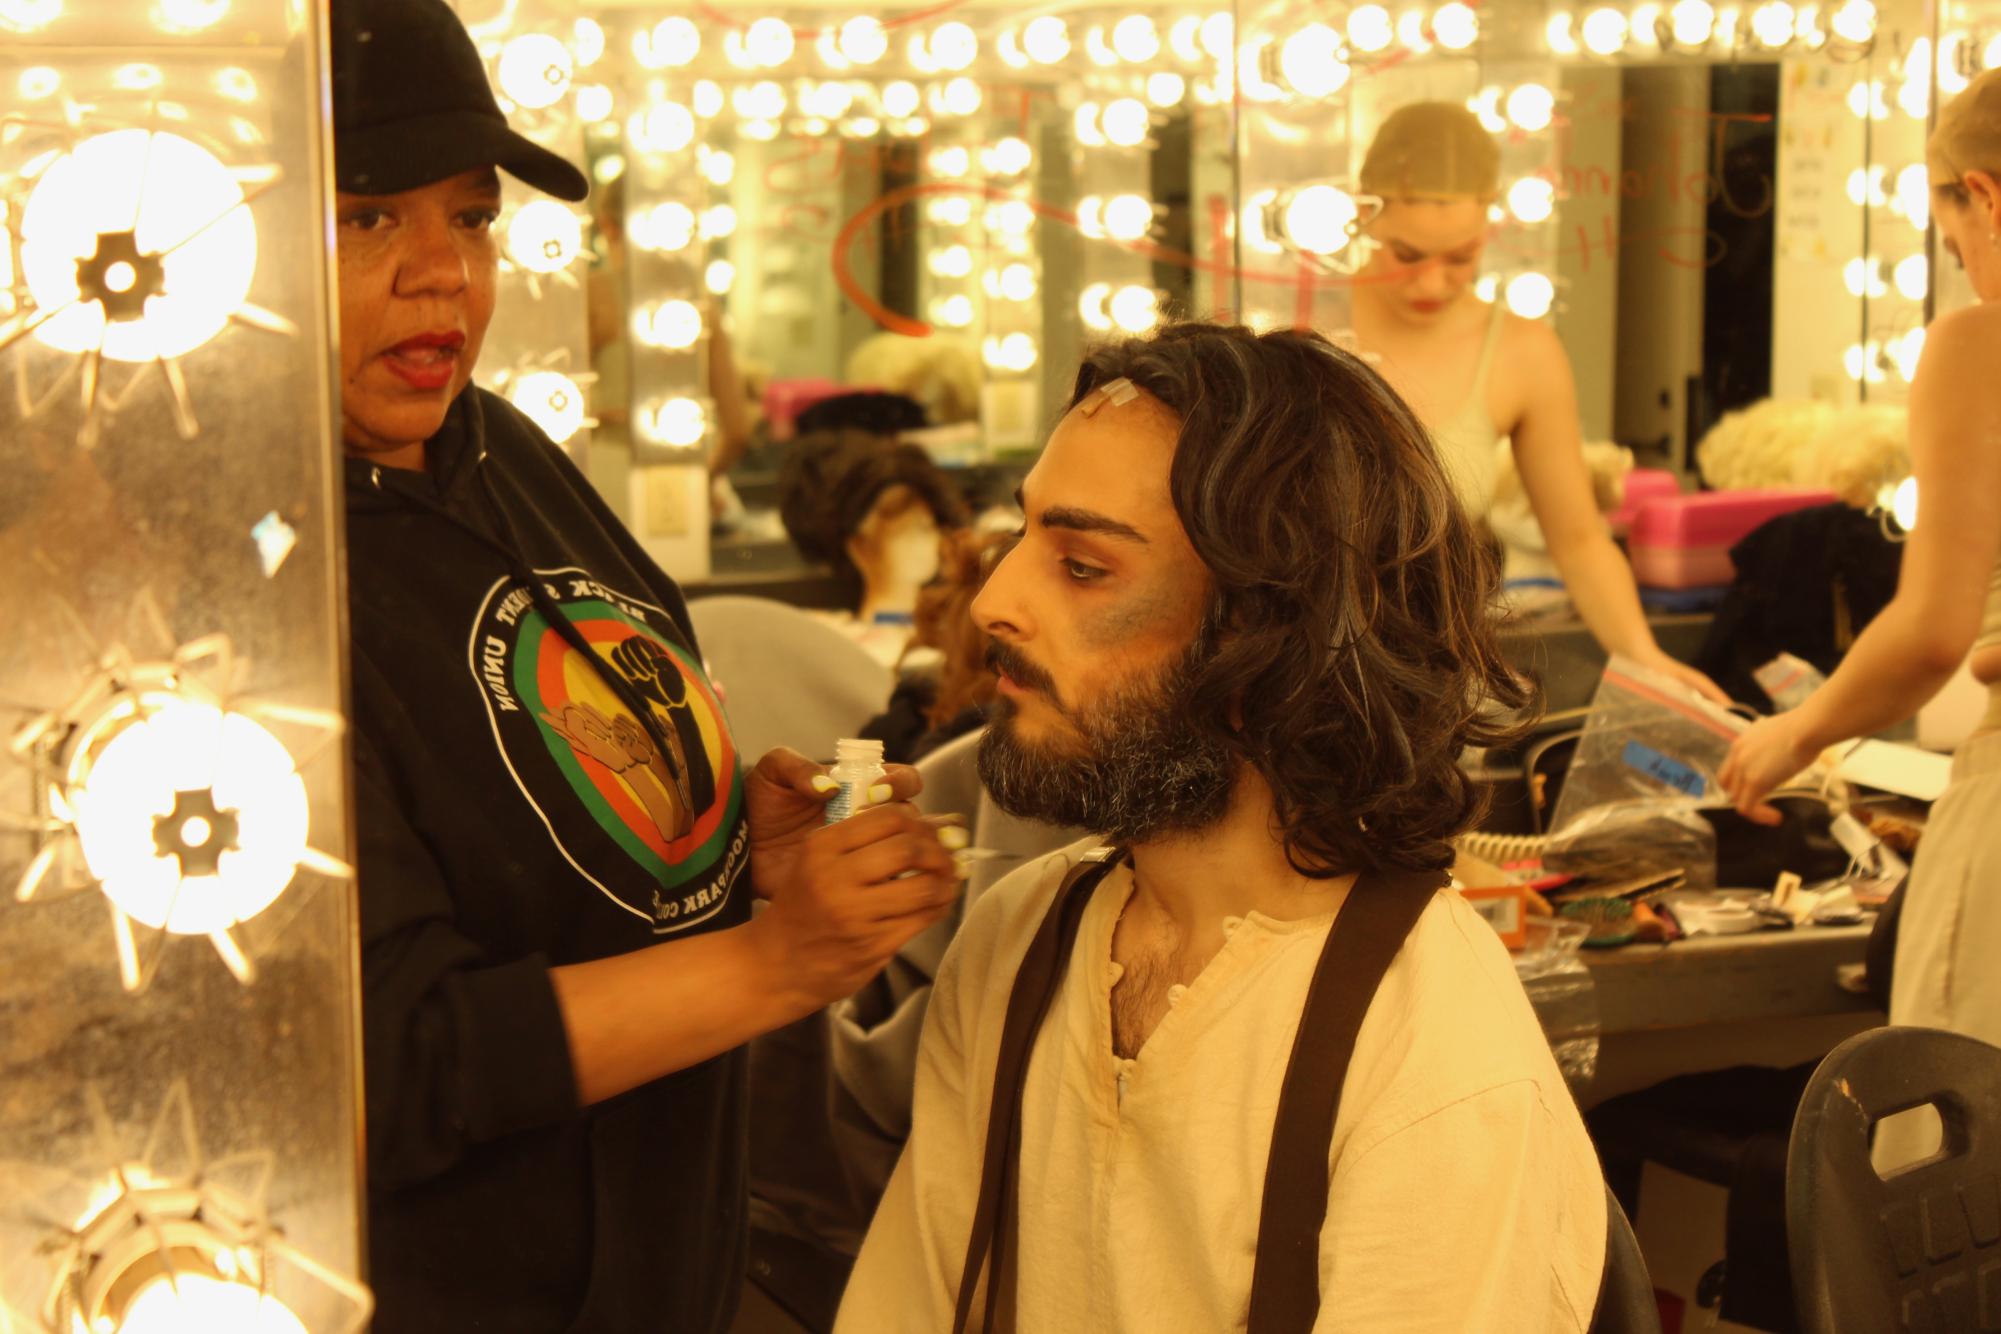 Hair/Wig Designer J&squot;enyce Johnson putting the finishing touches on Trevor Alkazian&squot;s appearance before the premiere of "Sweeney Todd: The Demon Barber of Fleet Street."